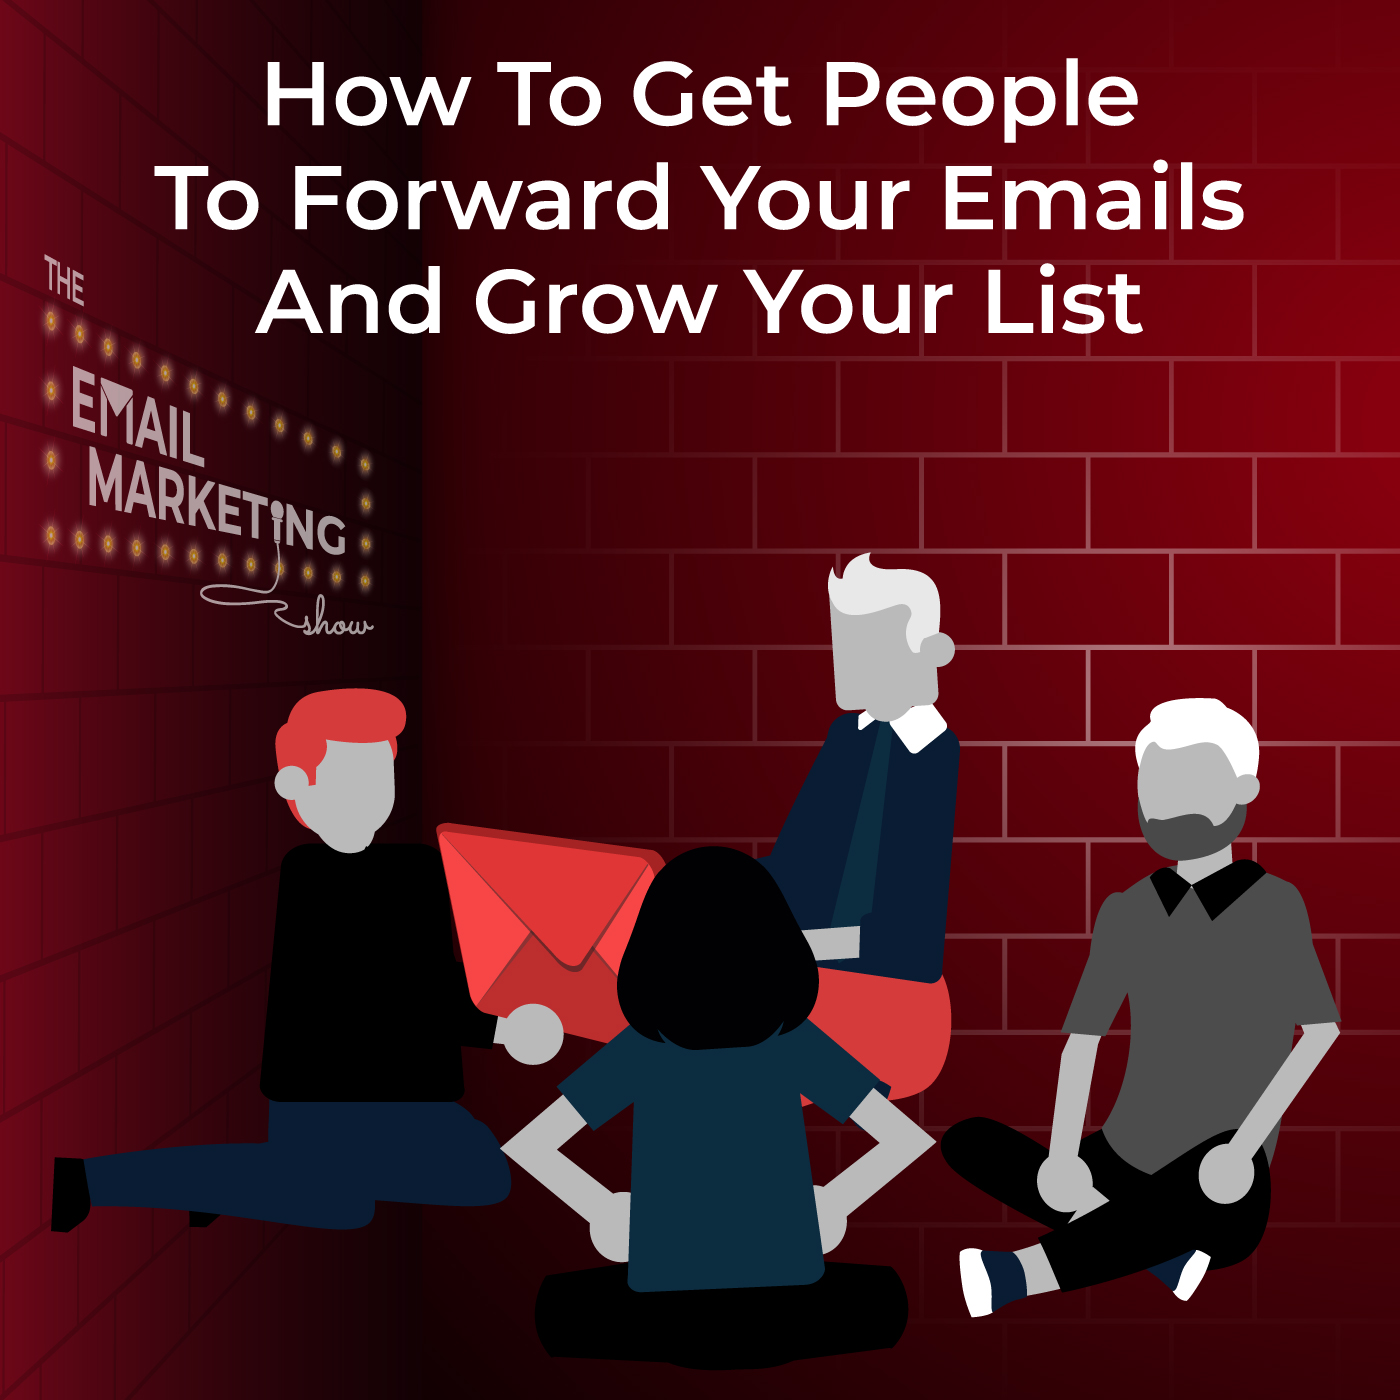 How To Get People To Forward Your Emails And Grow Your List